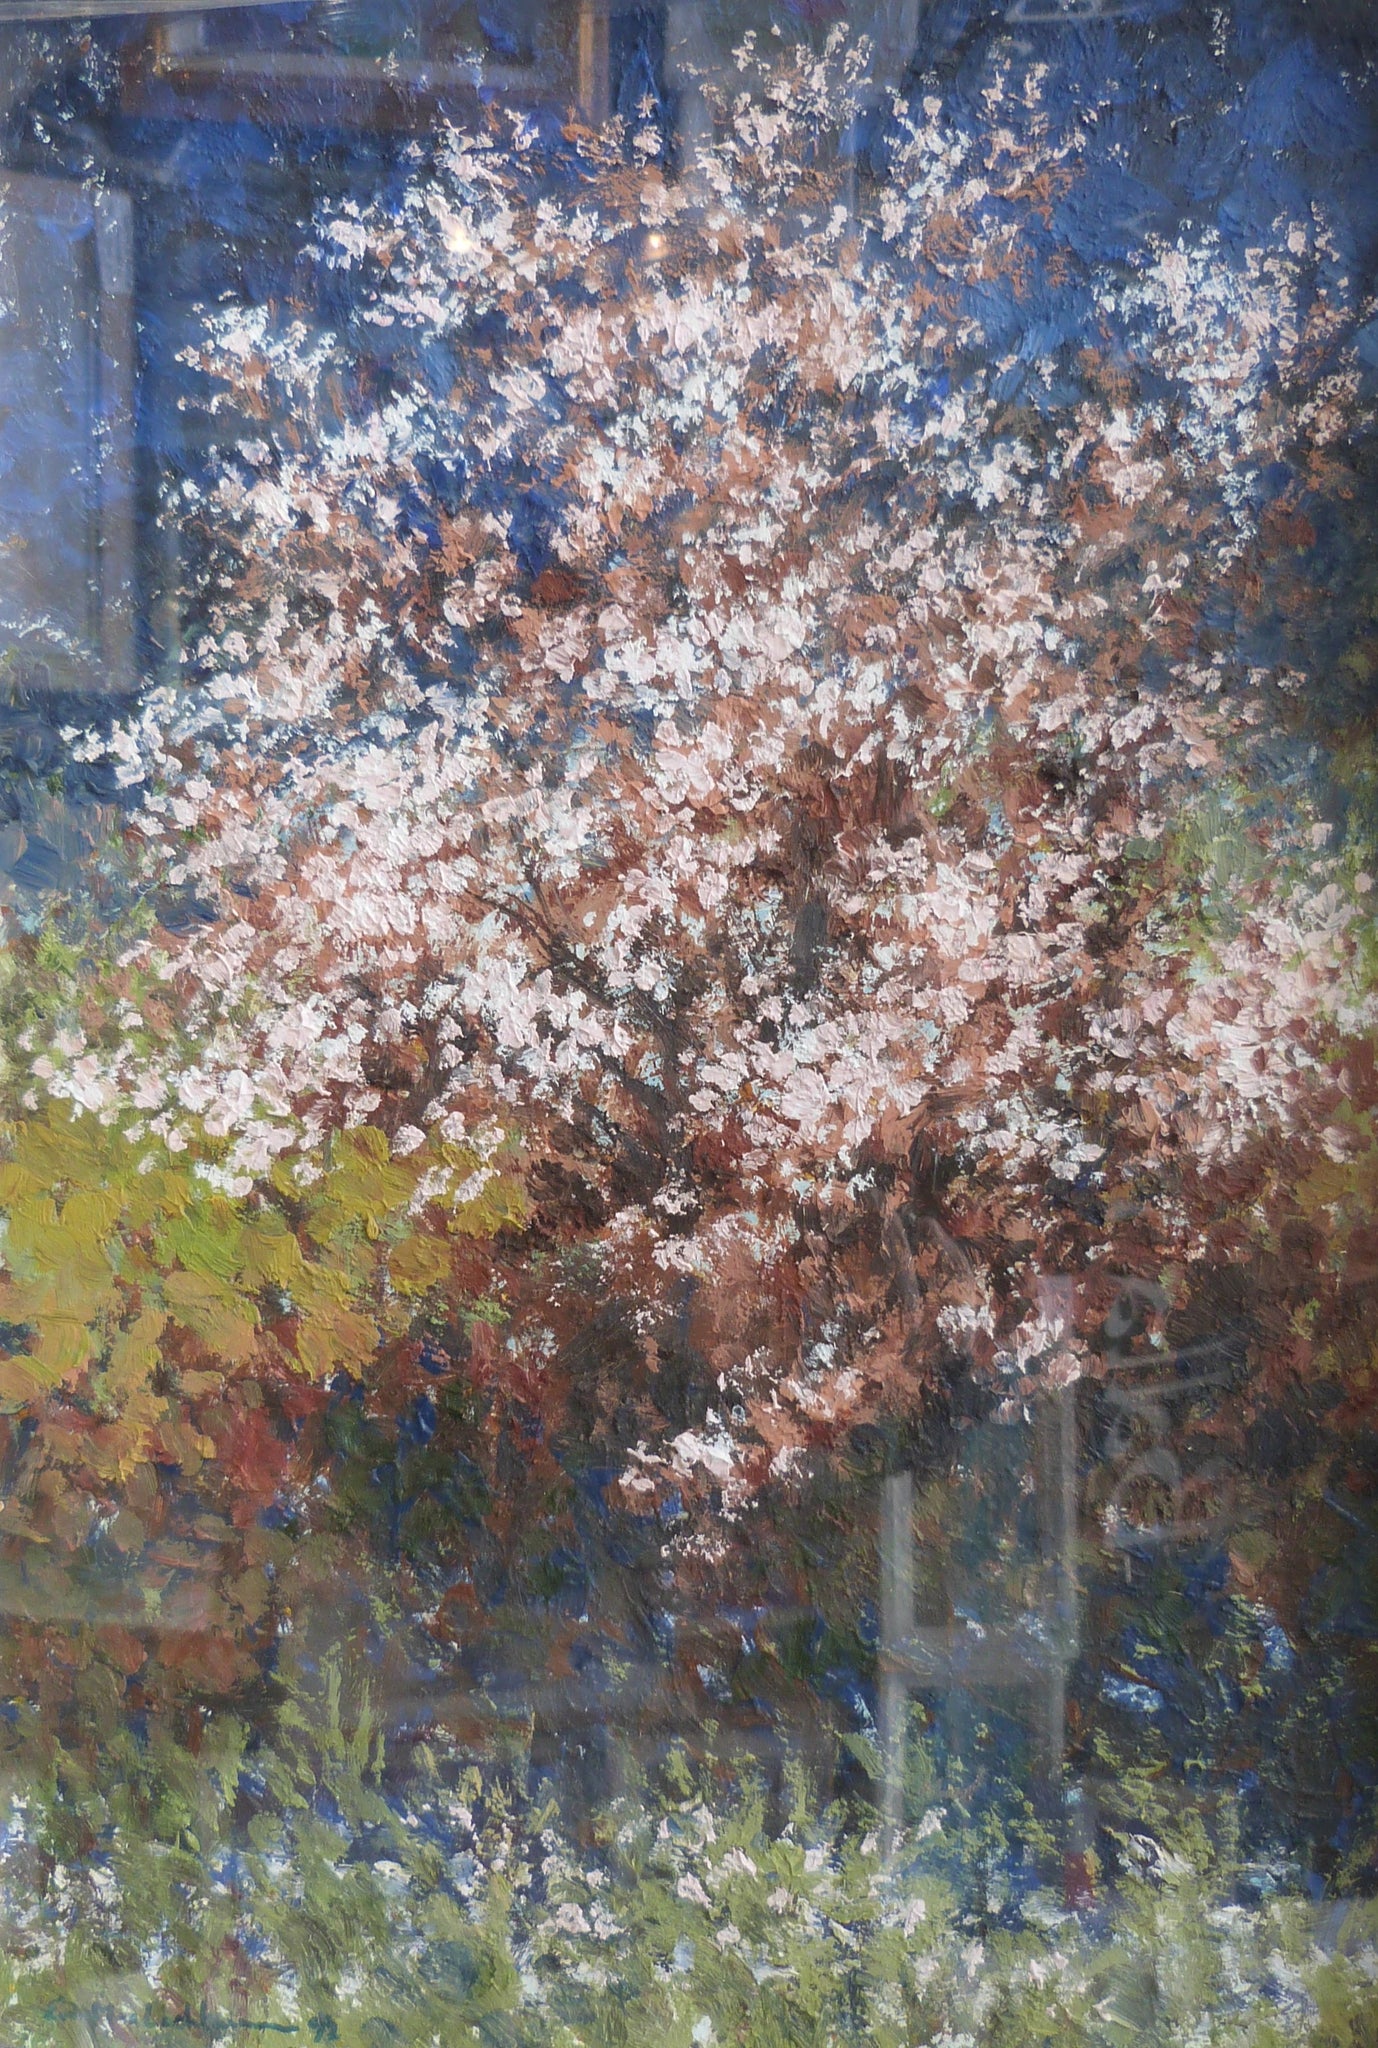 Miscellaneous - Other Artists - Eoin Mac Lochlainn "Trees in bloom"